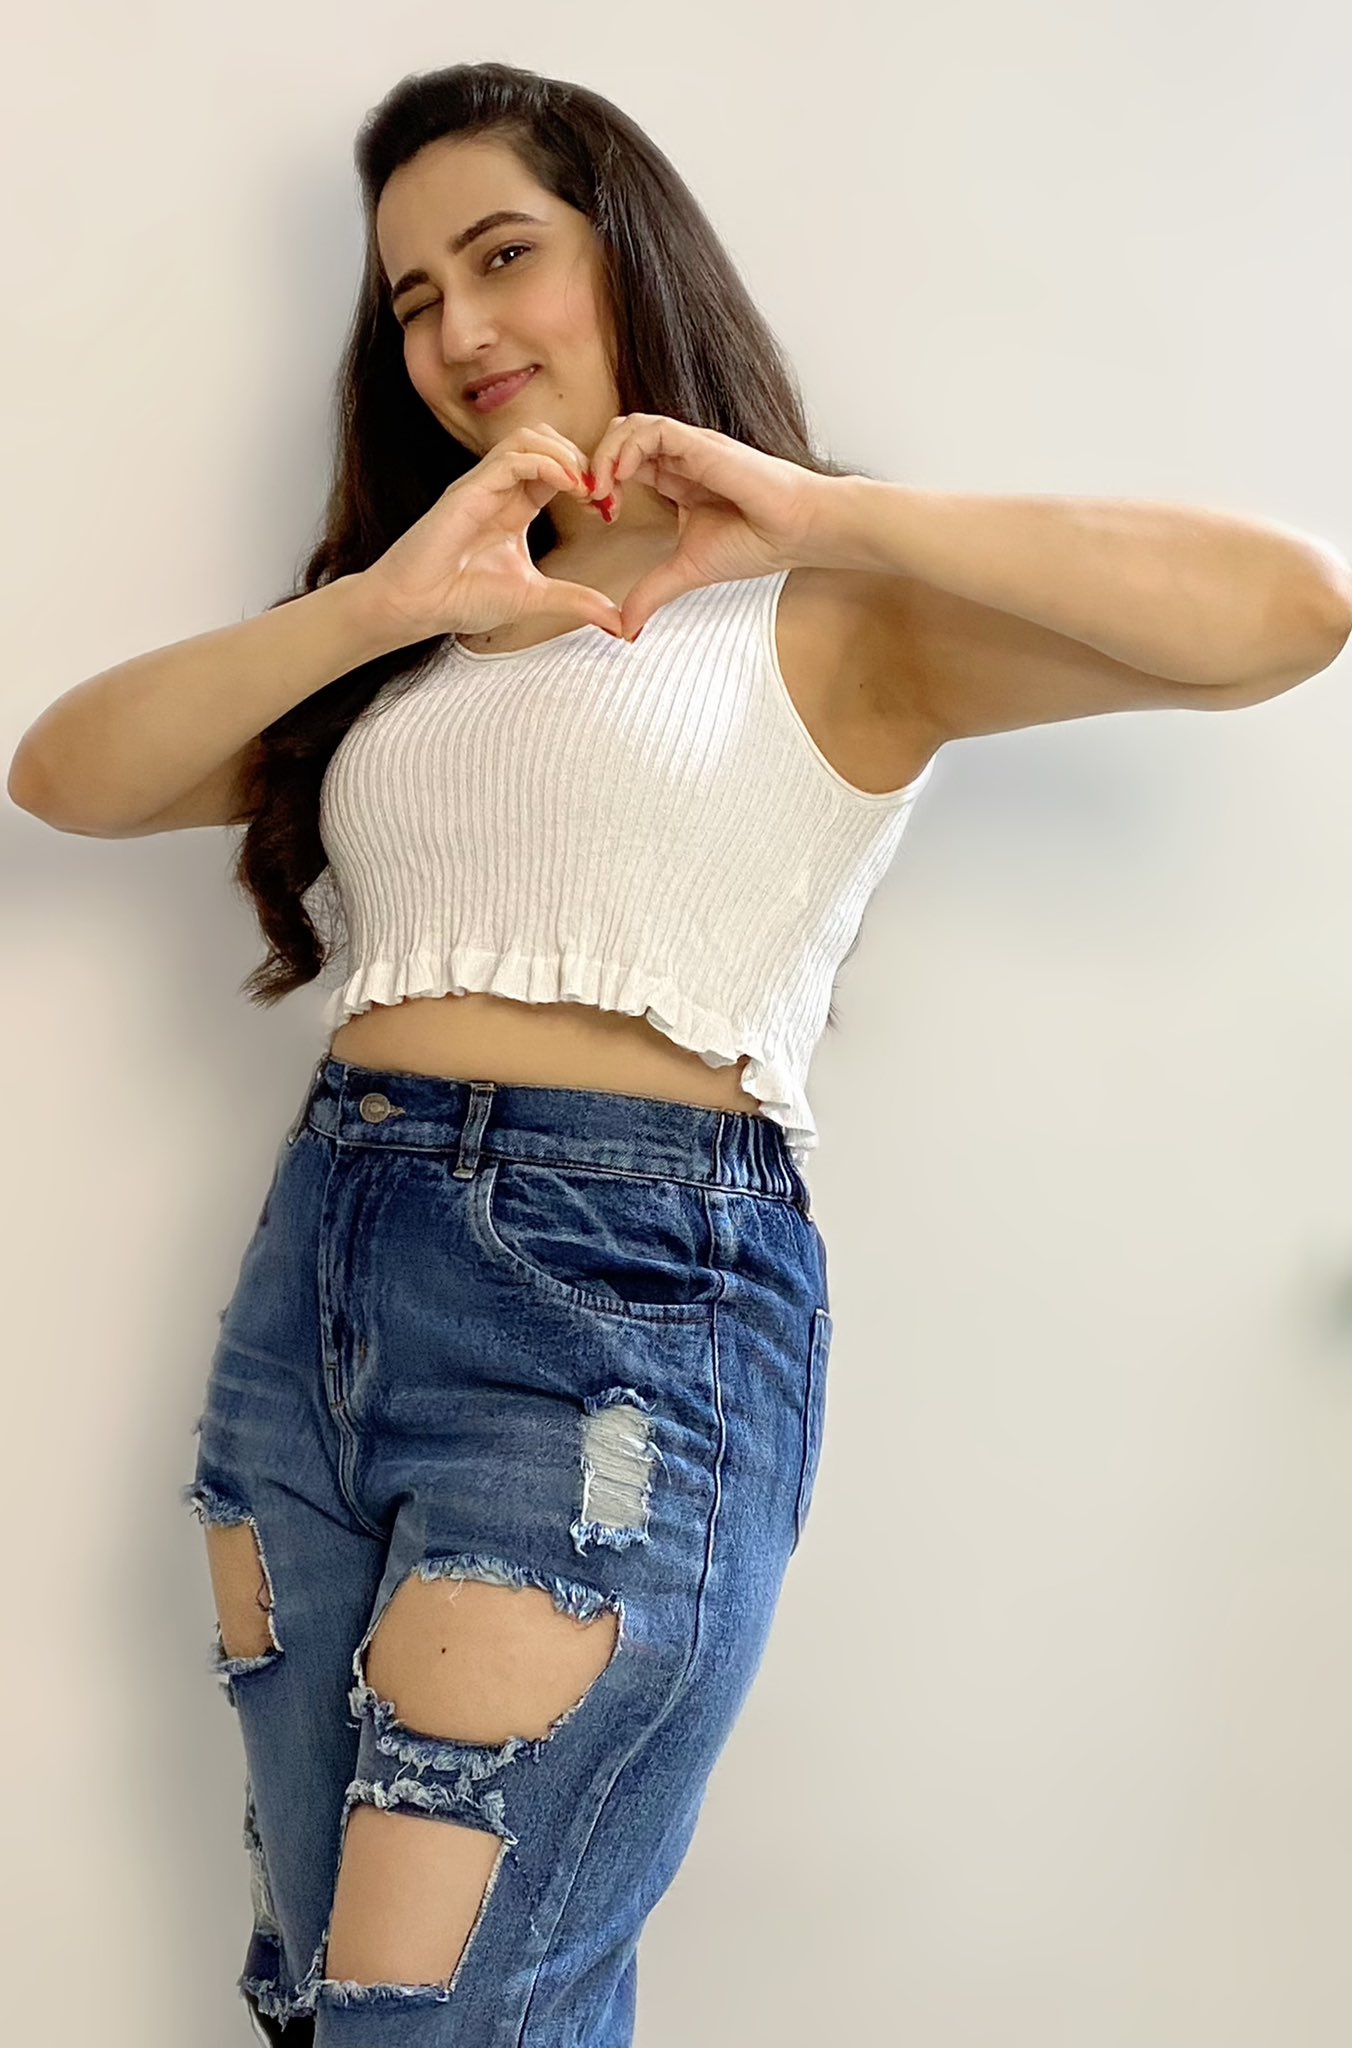 MANJUSHA hot poses in white smocked crop top and ripped jeans